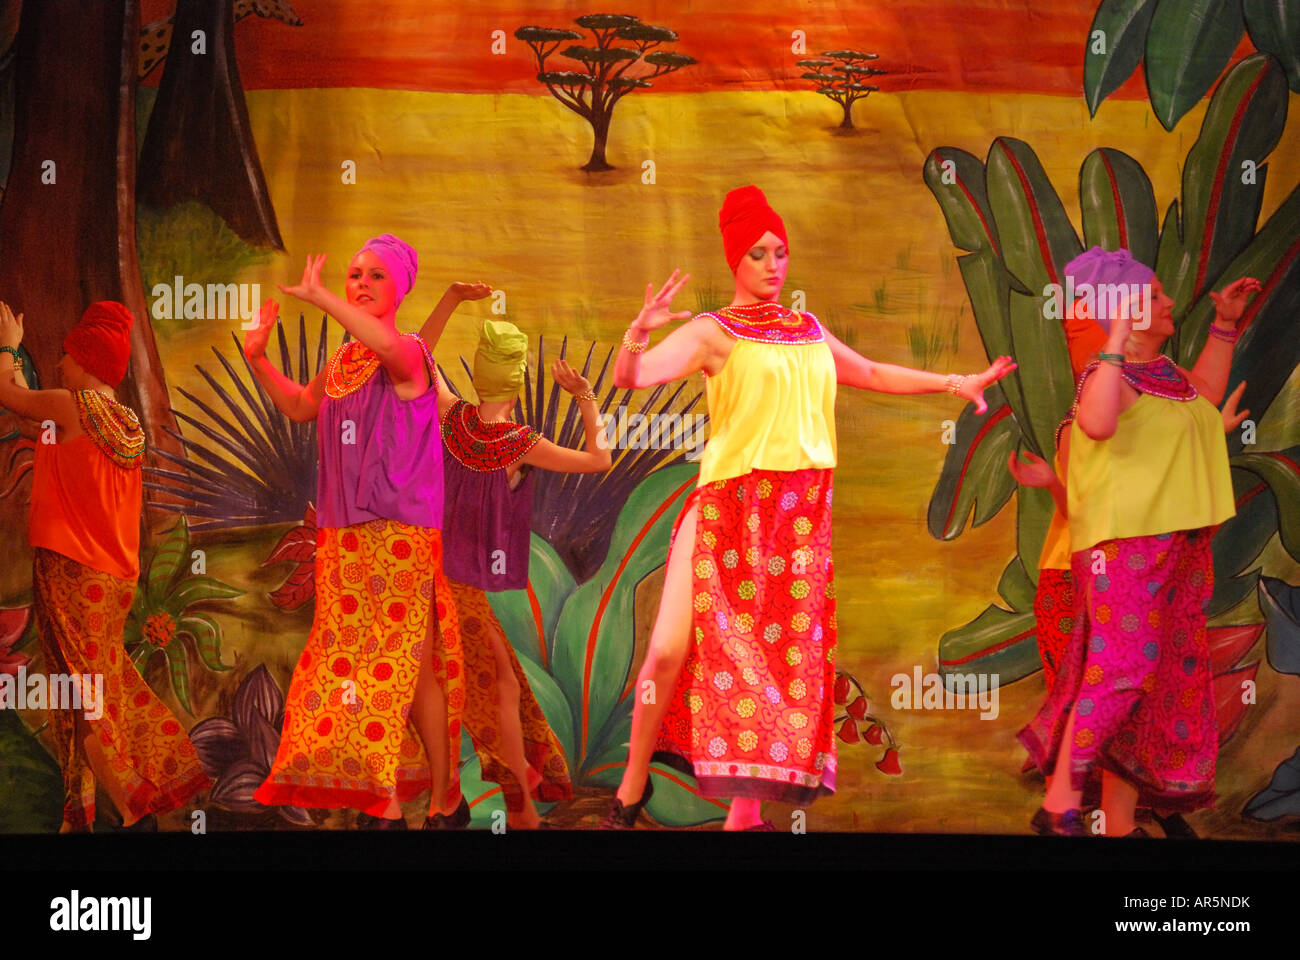 'Aladdin' Pantomime play, Club Concorde, Middlesex, England, United Kingdom Banque D'Images